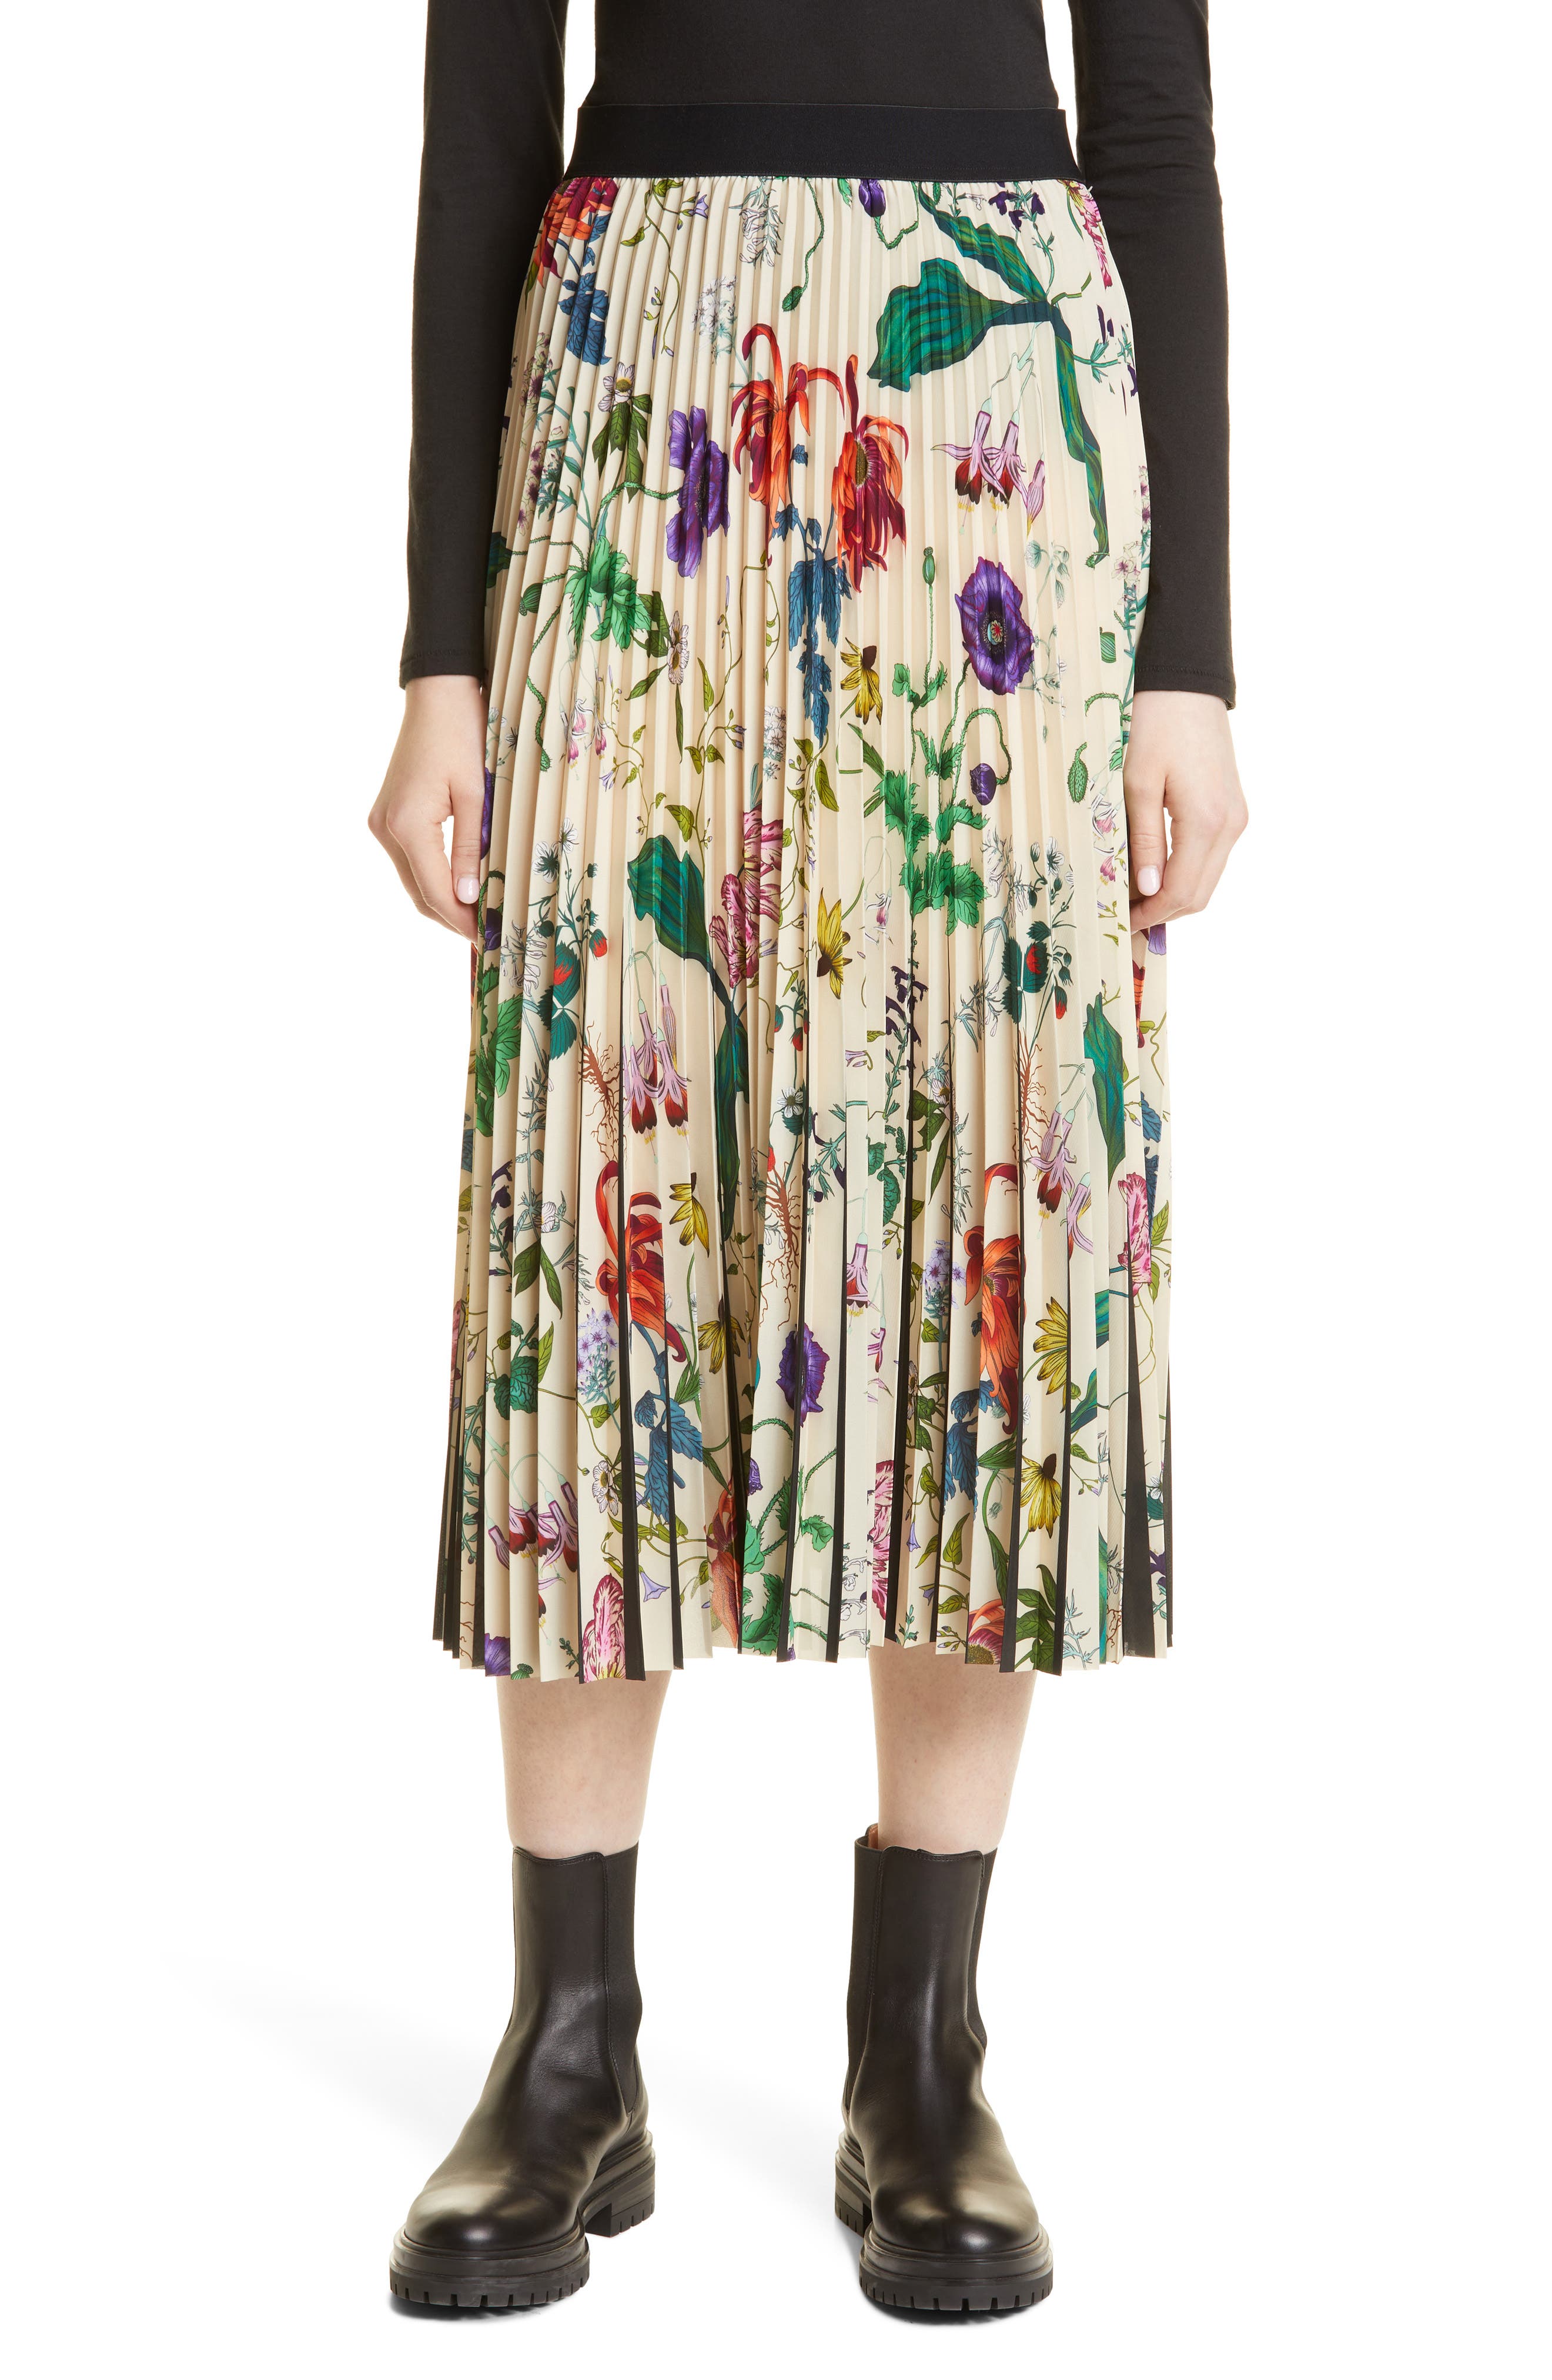 KENZO Ink blue floral lined skirt  Sizes 4 and 12